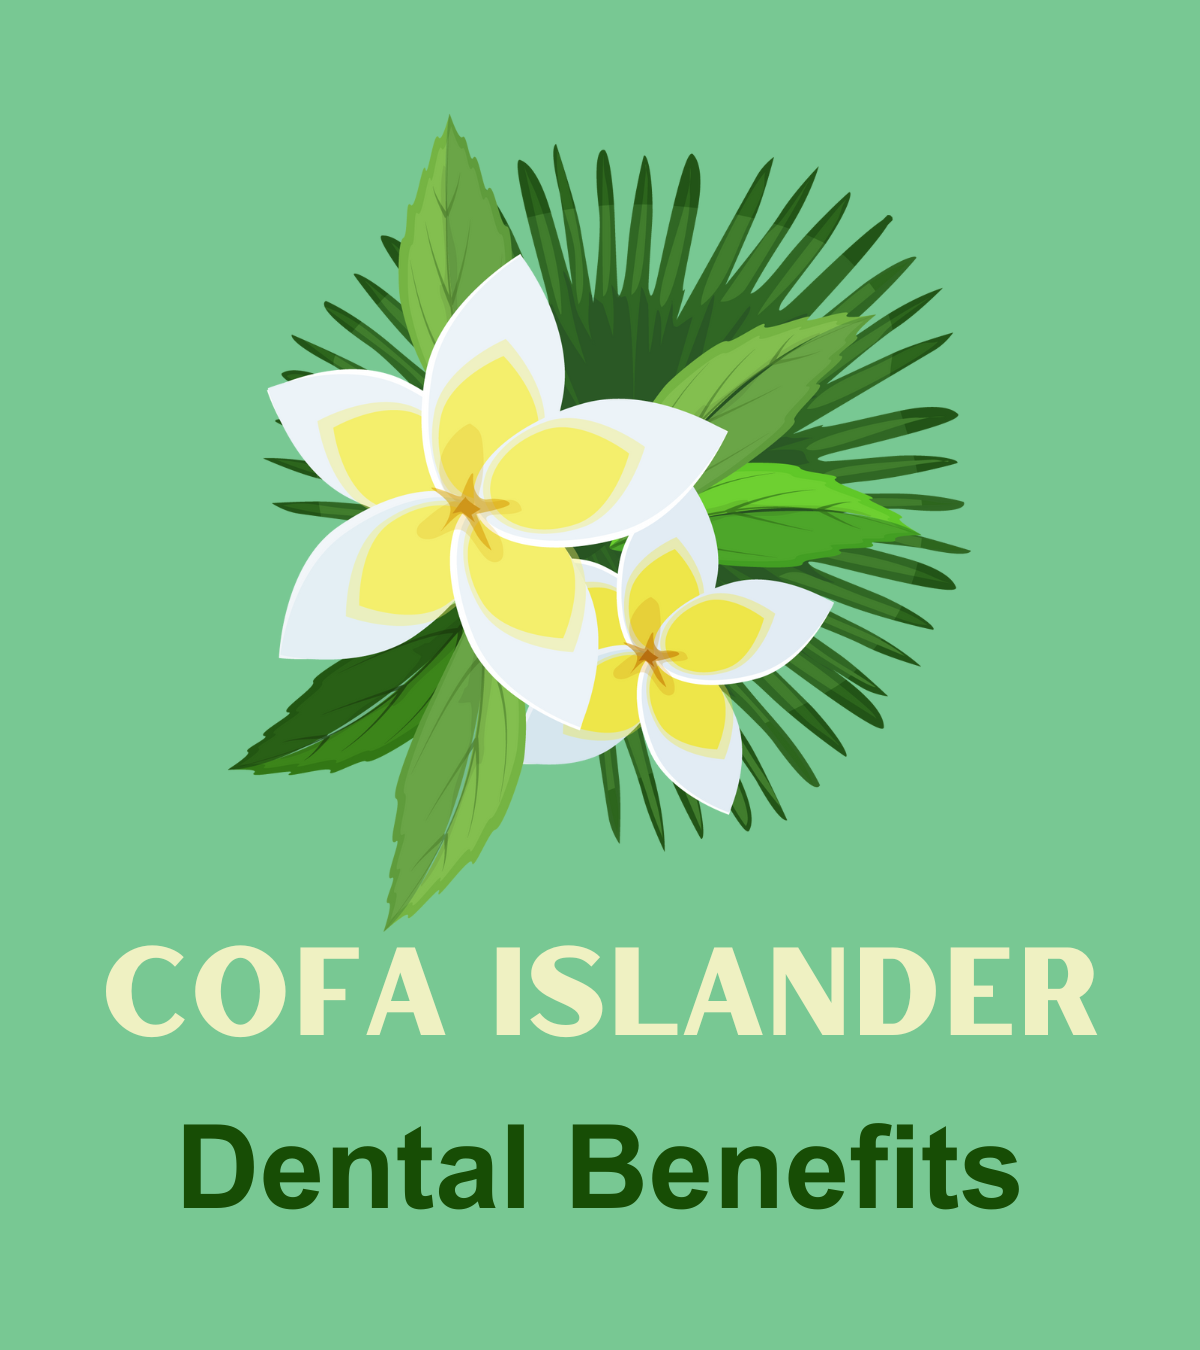 Green background with image of tropical flowers. Text: COFA Islander Dental Benefits.